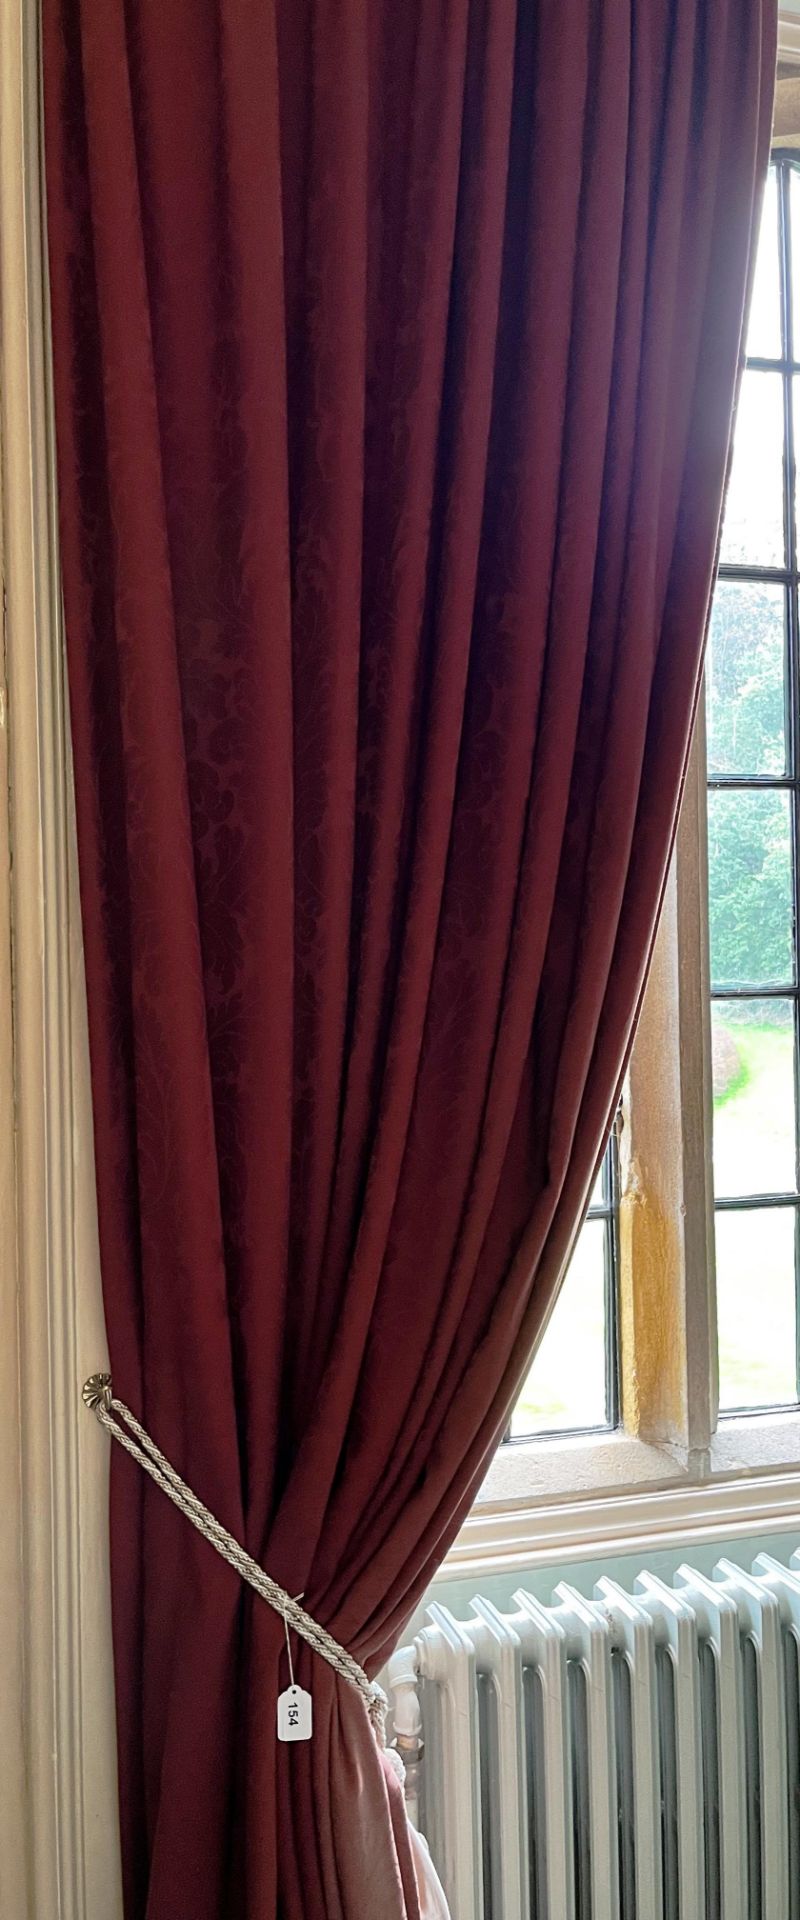 A PAIR OF RED LINED CURTAINS